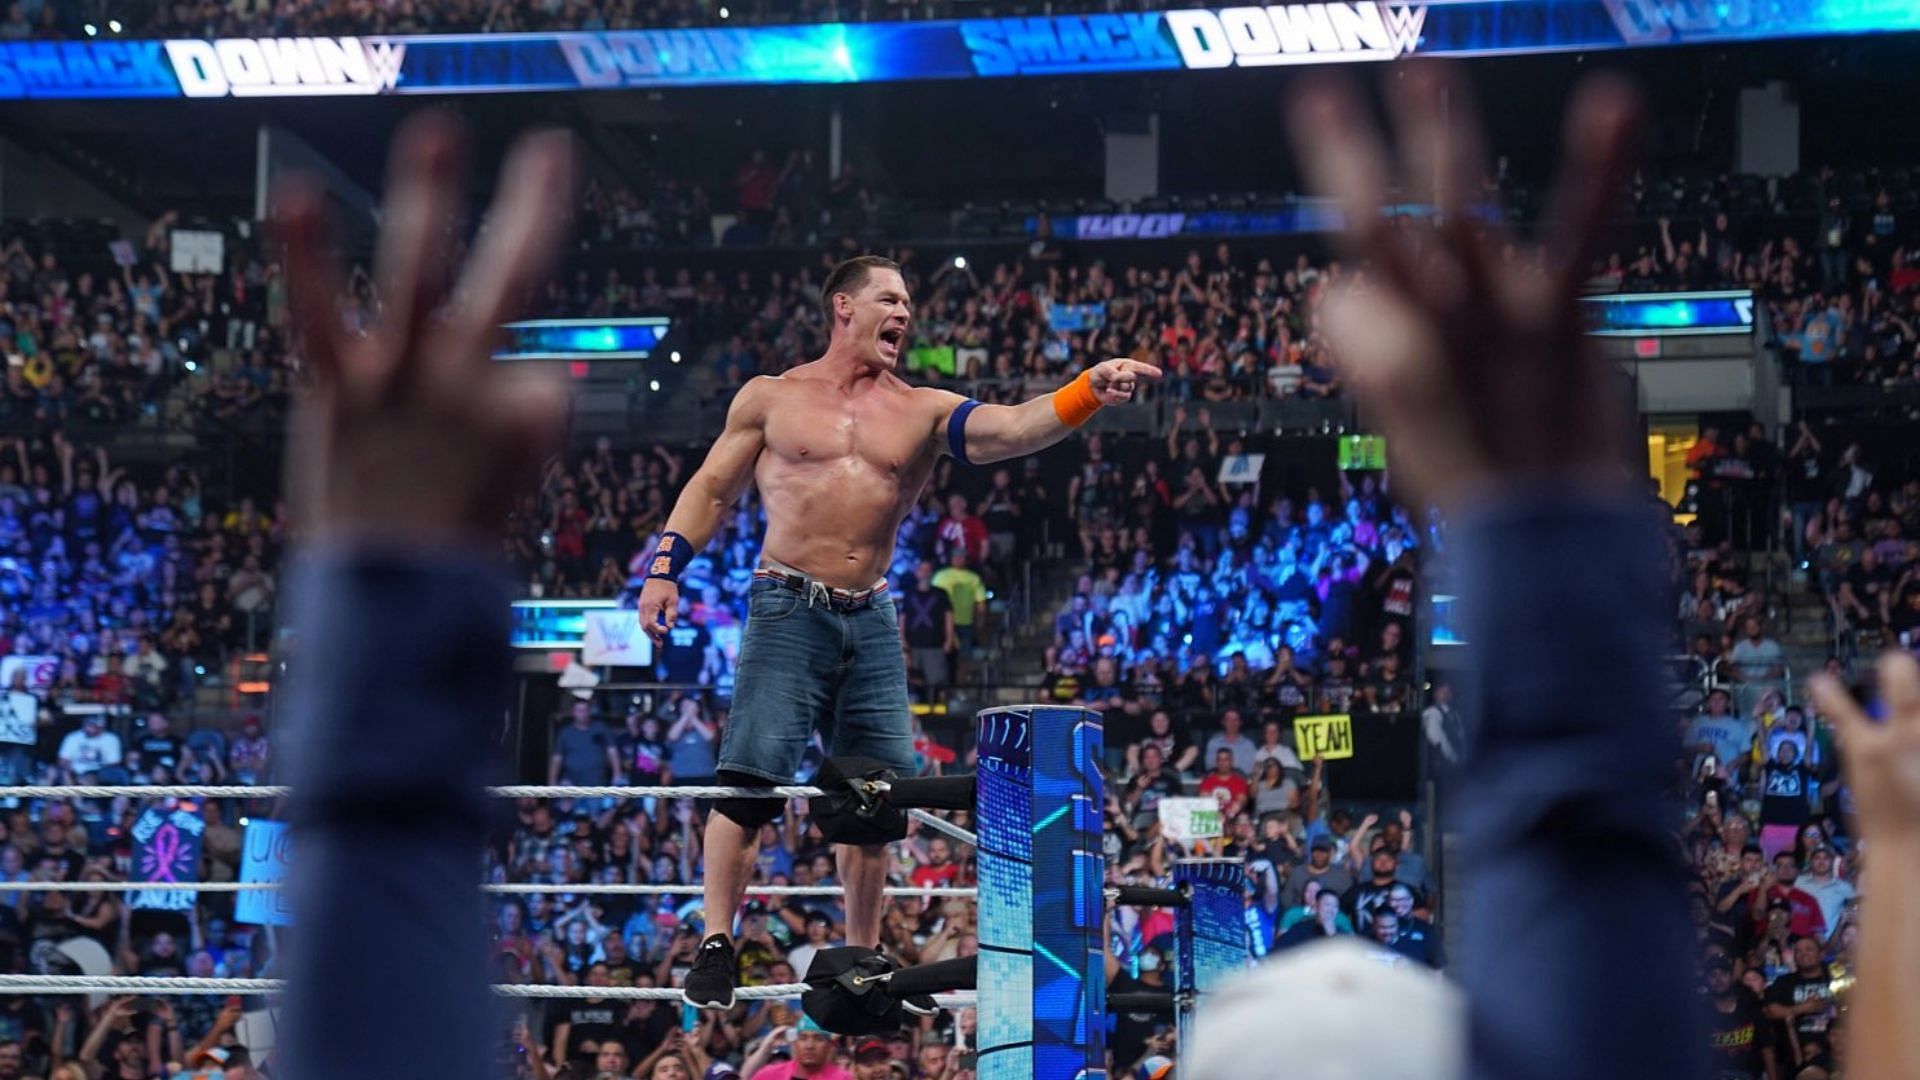 What is next for John Cena in WWE?